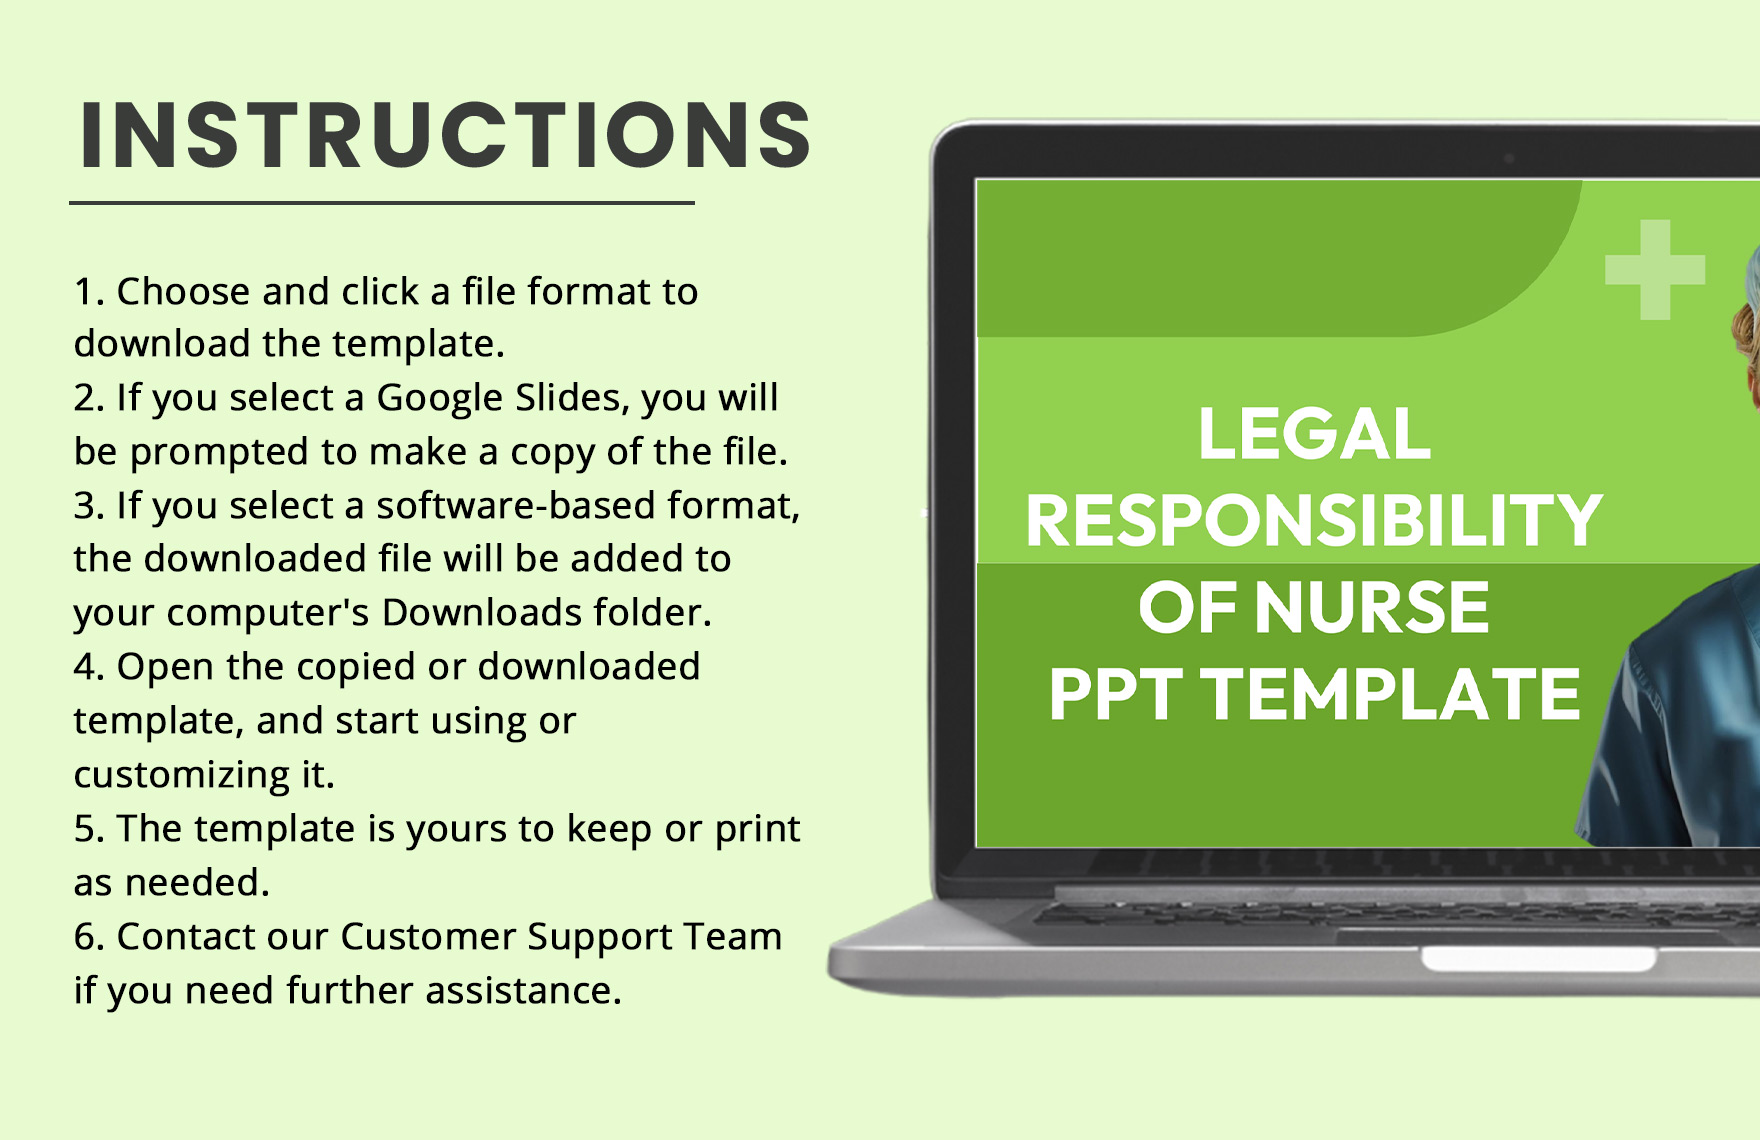 Legal Responsibility of Nurse PPT Template